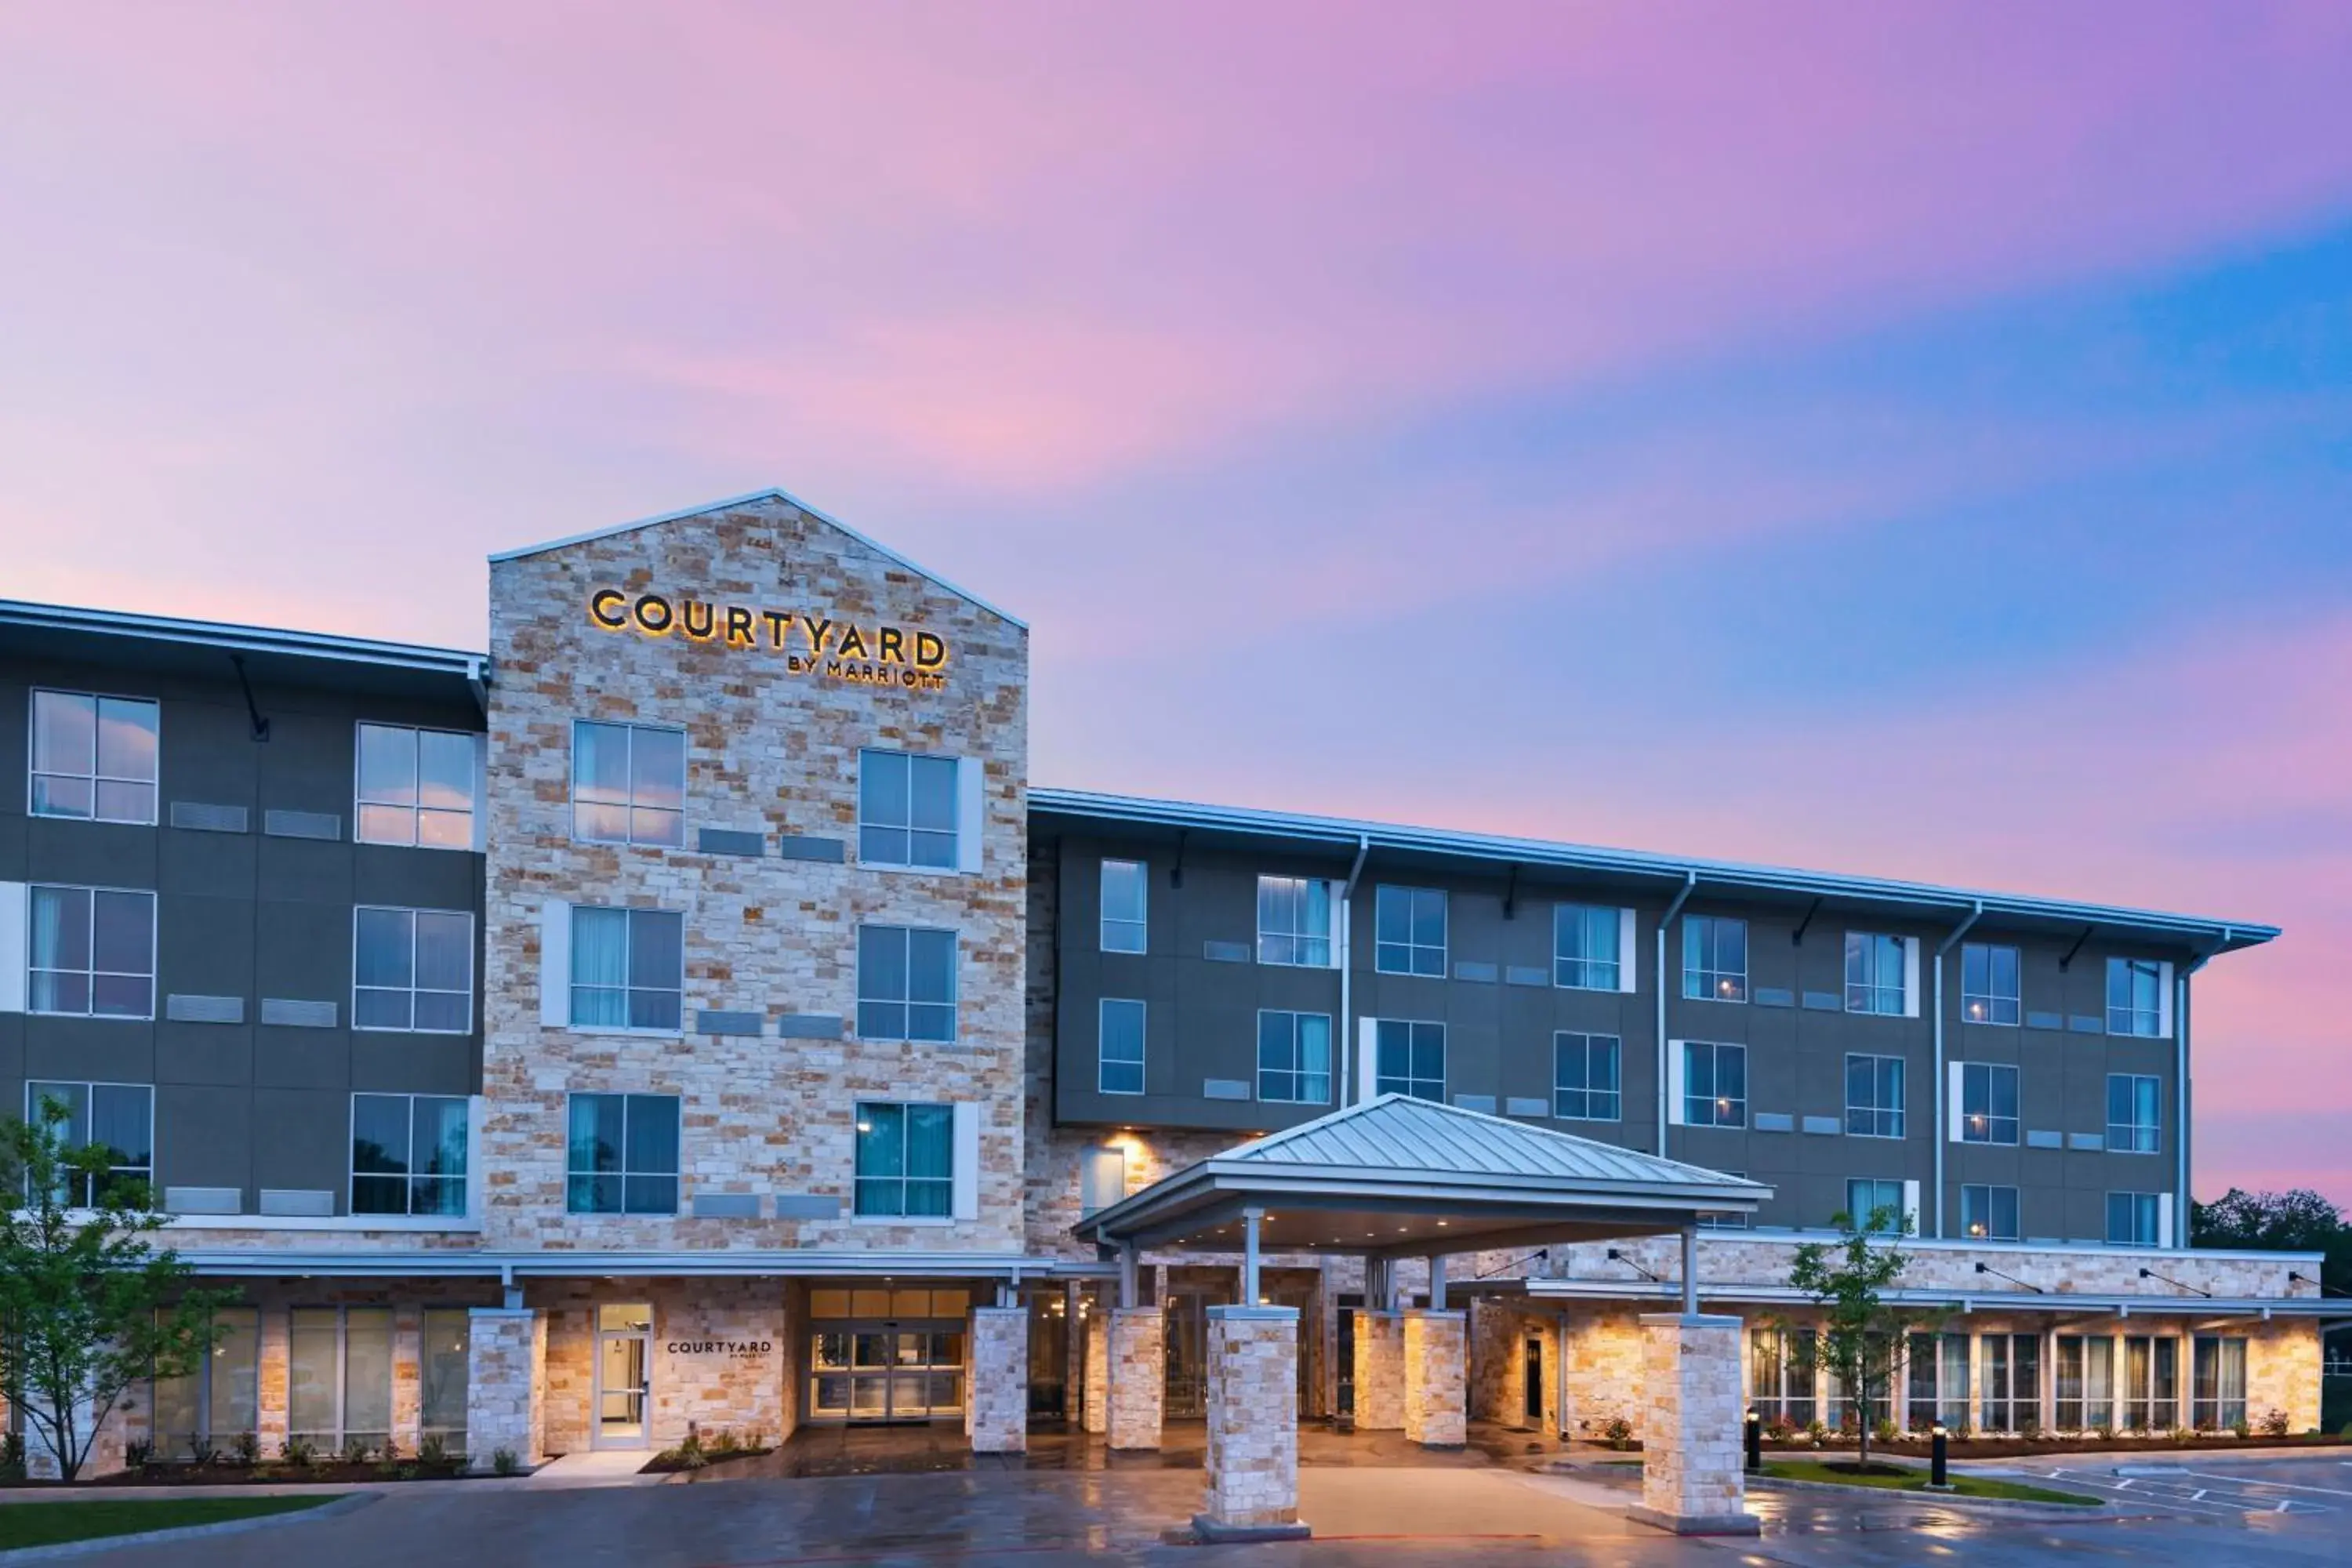 Property Building in Courtyard by Marriott Austin Dripping Springs